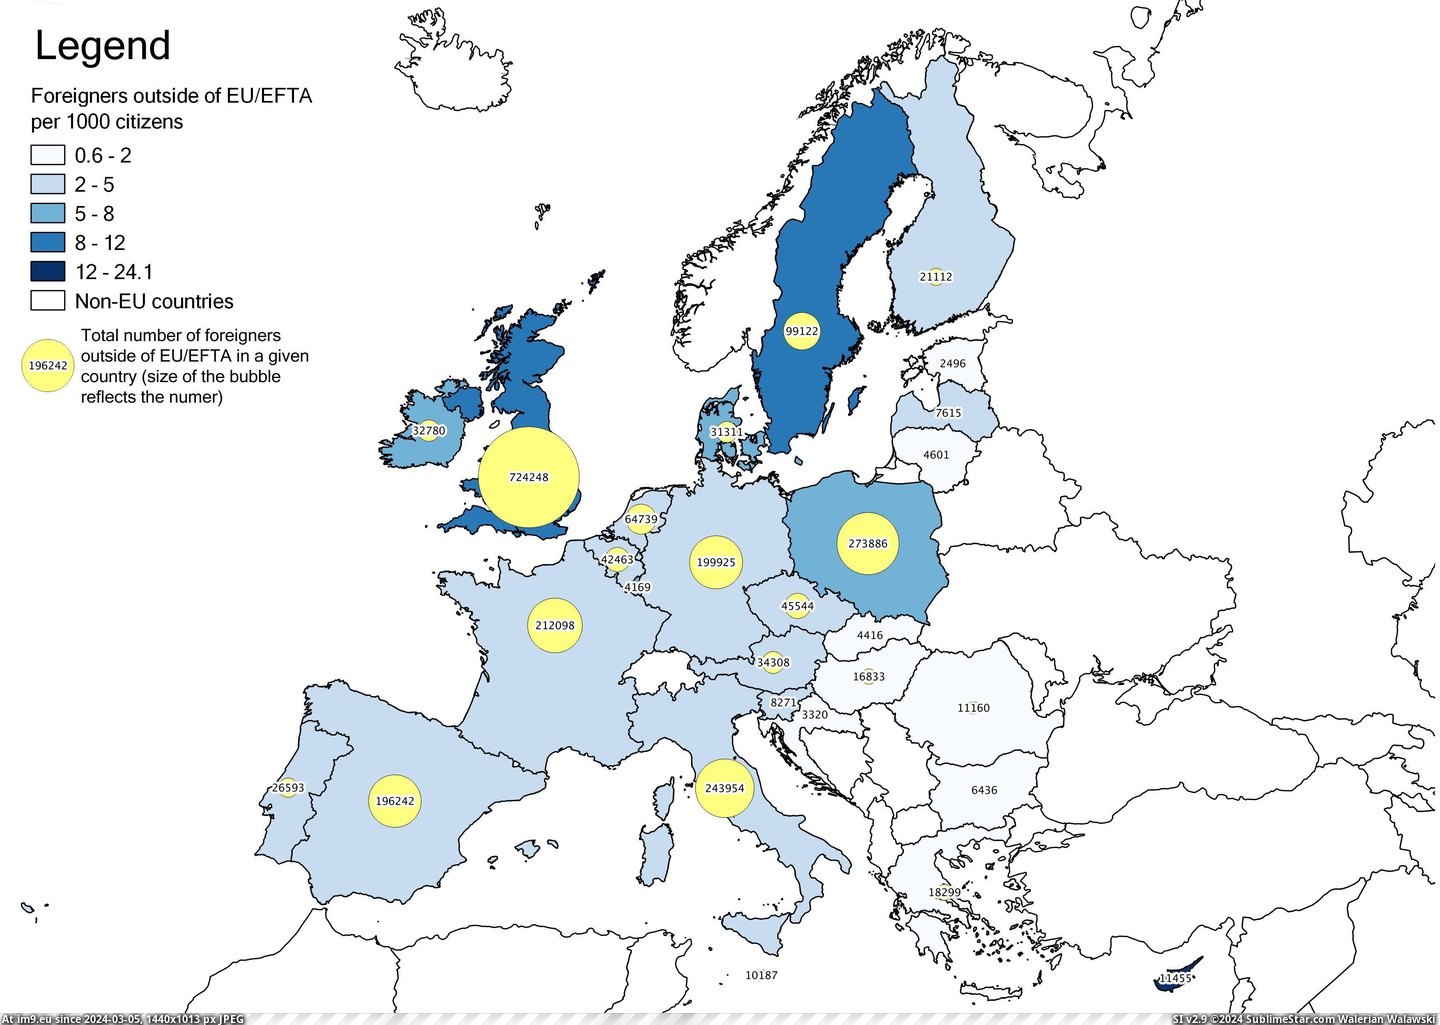 #Europe #Foreigners #Visas #Temporary #Efta [Mapporn] Temporary visas for foreigners outside of EU-EFTA in Europe in 2013 [OC] [3507×2480px] Pic. (Изображение из альбом My r/MAPS favs))